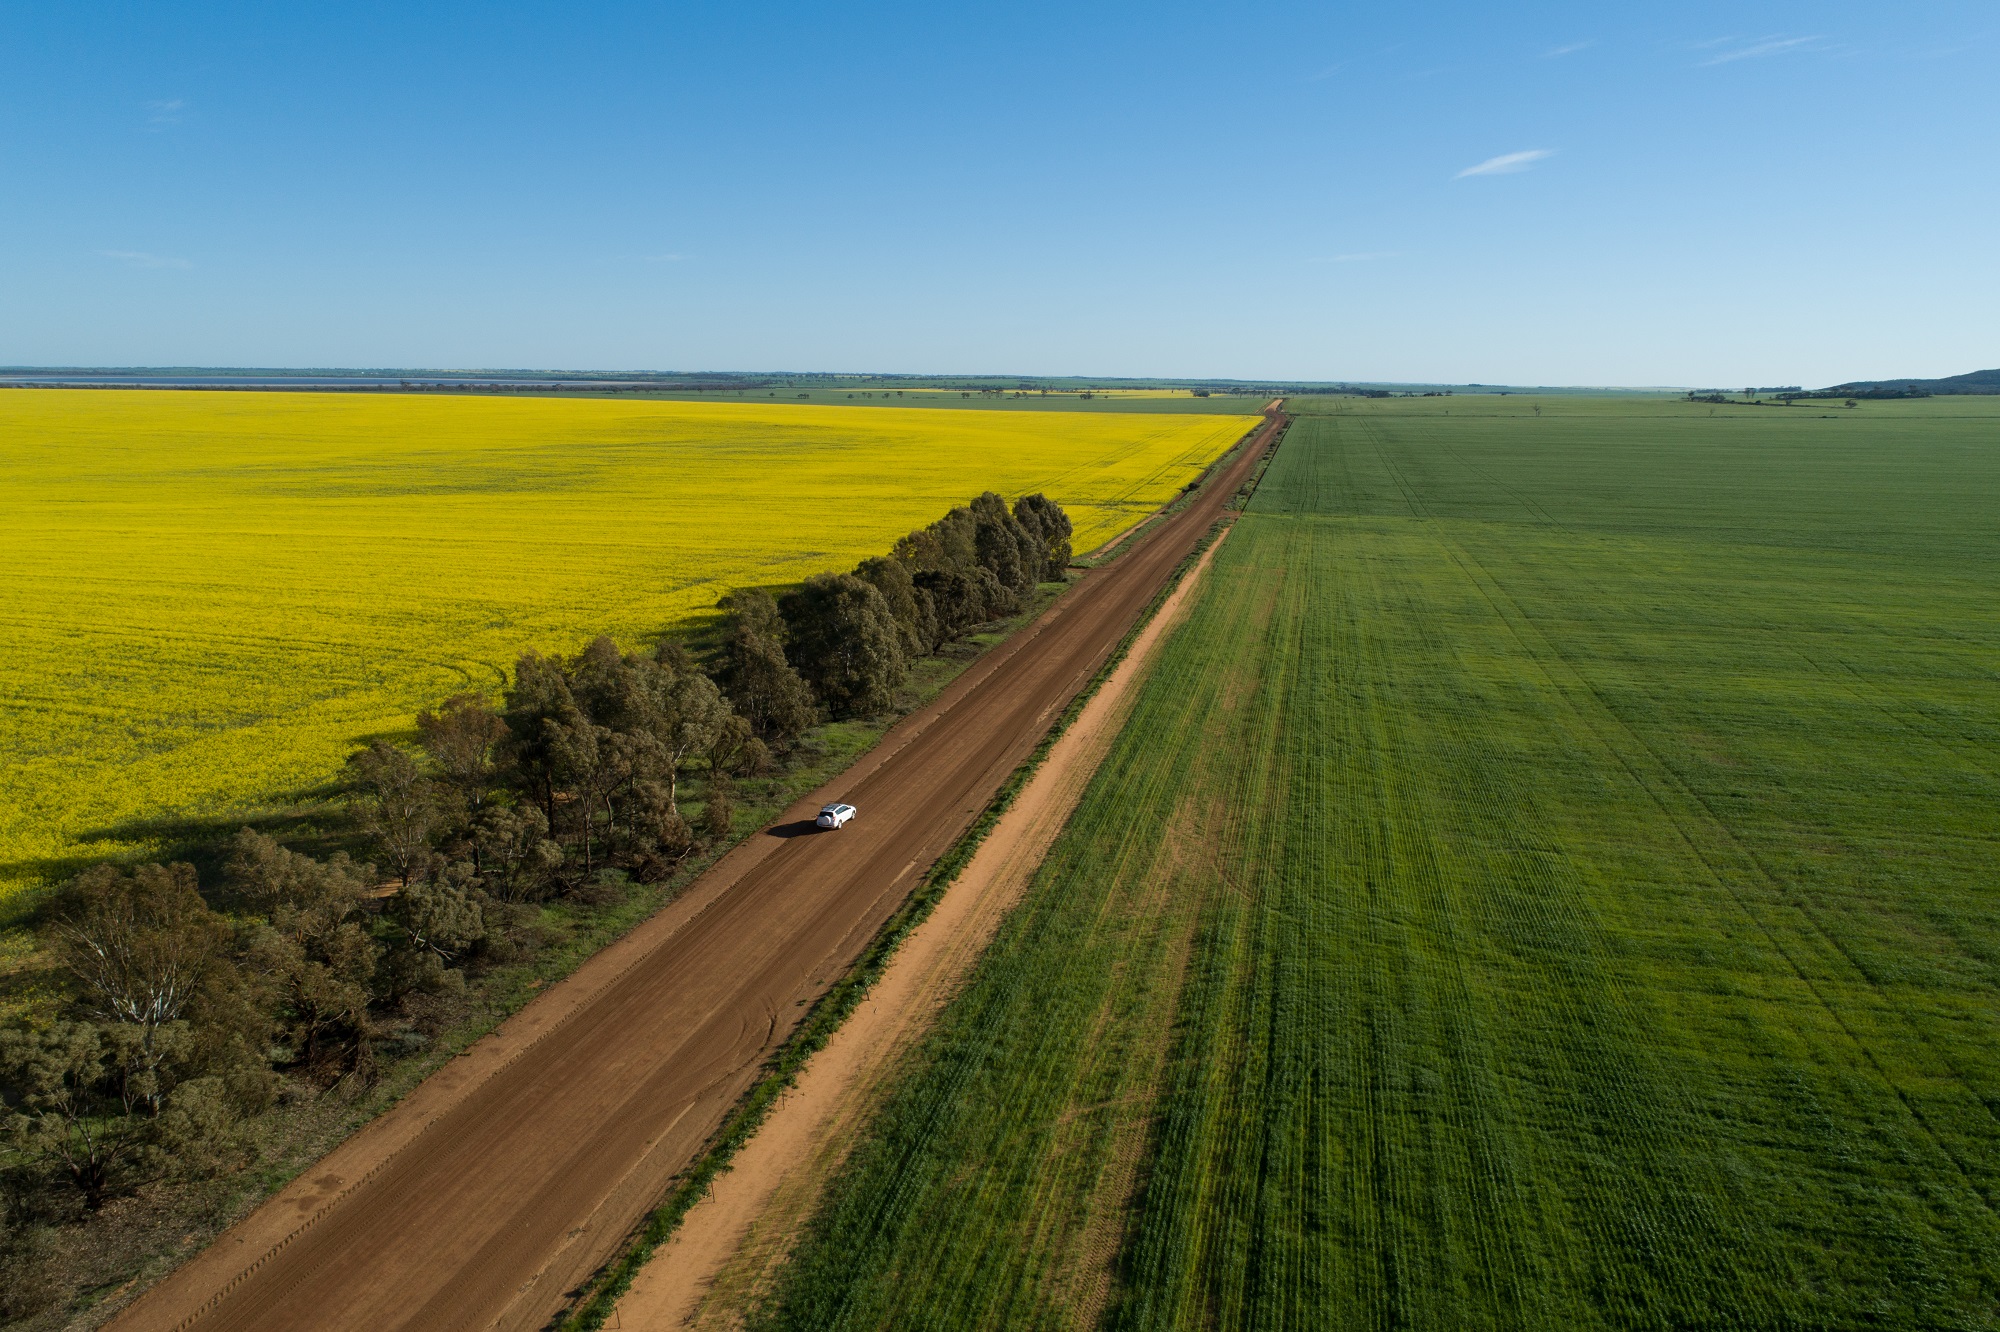 A car drives down a gravel road with a green paddock on the right and a yellow paddock on the left